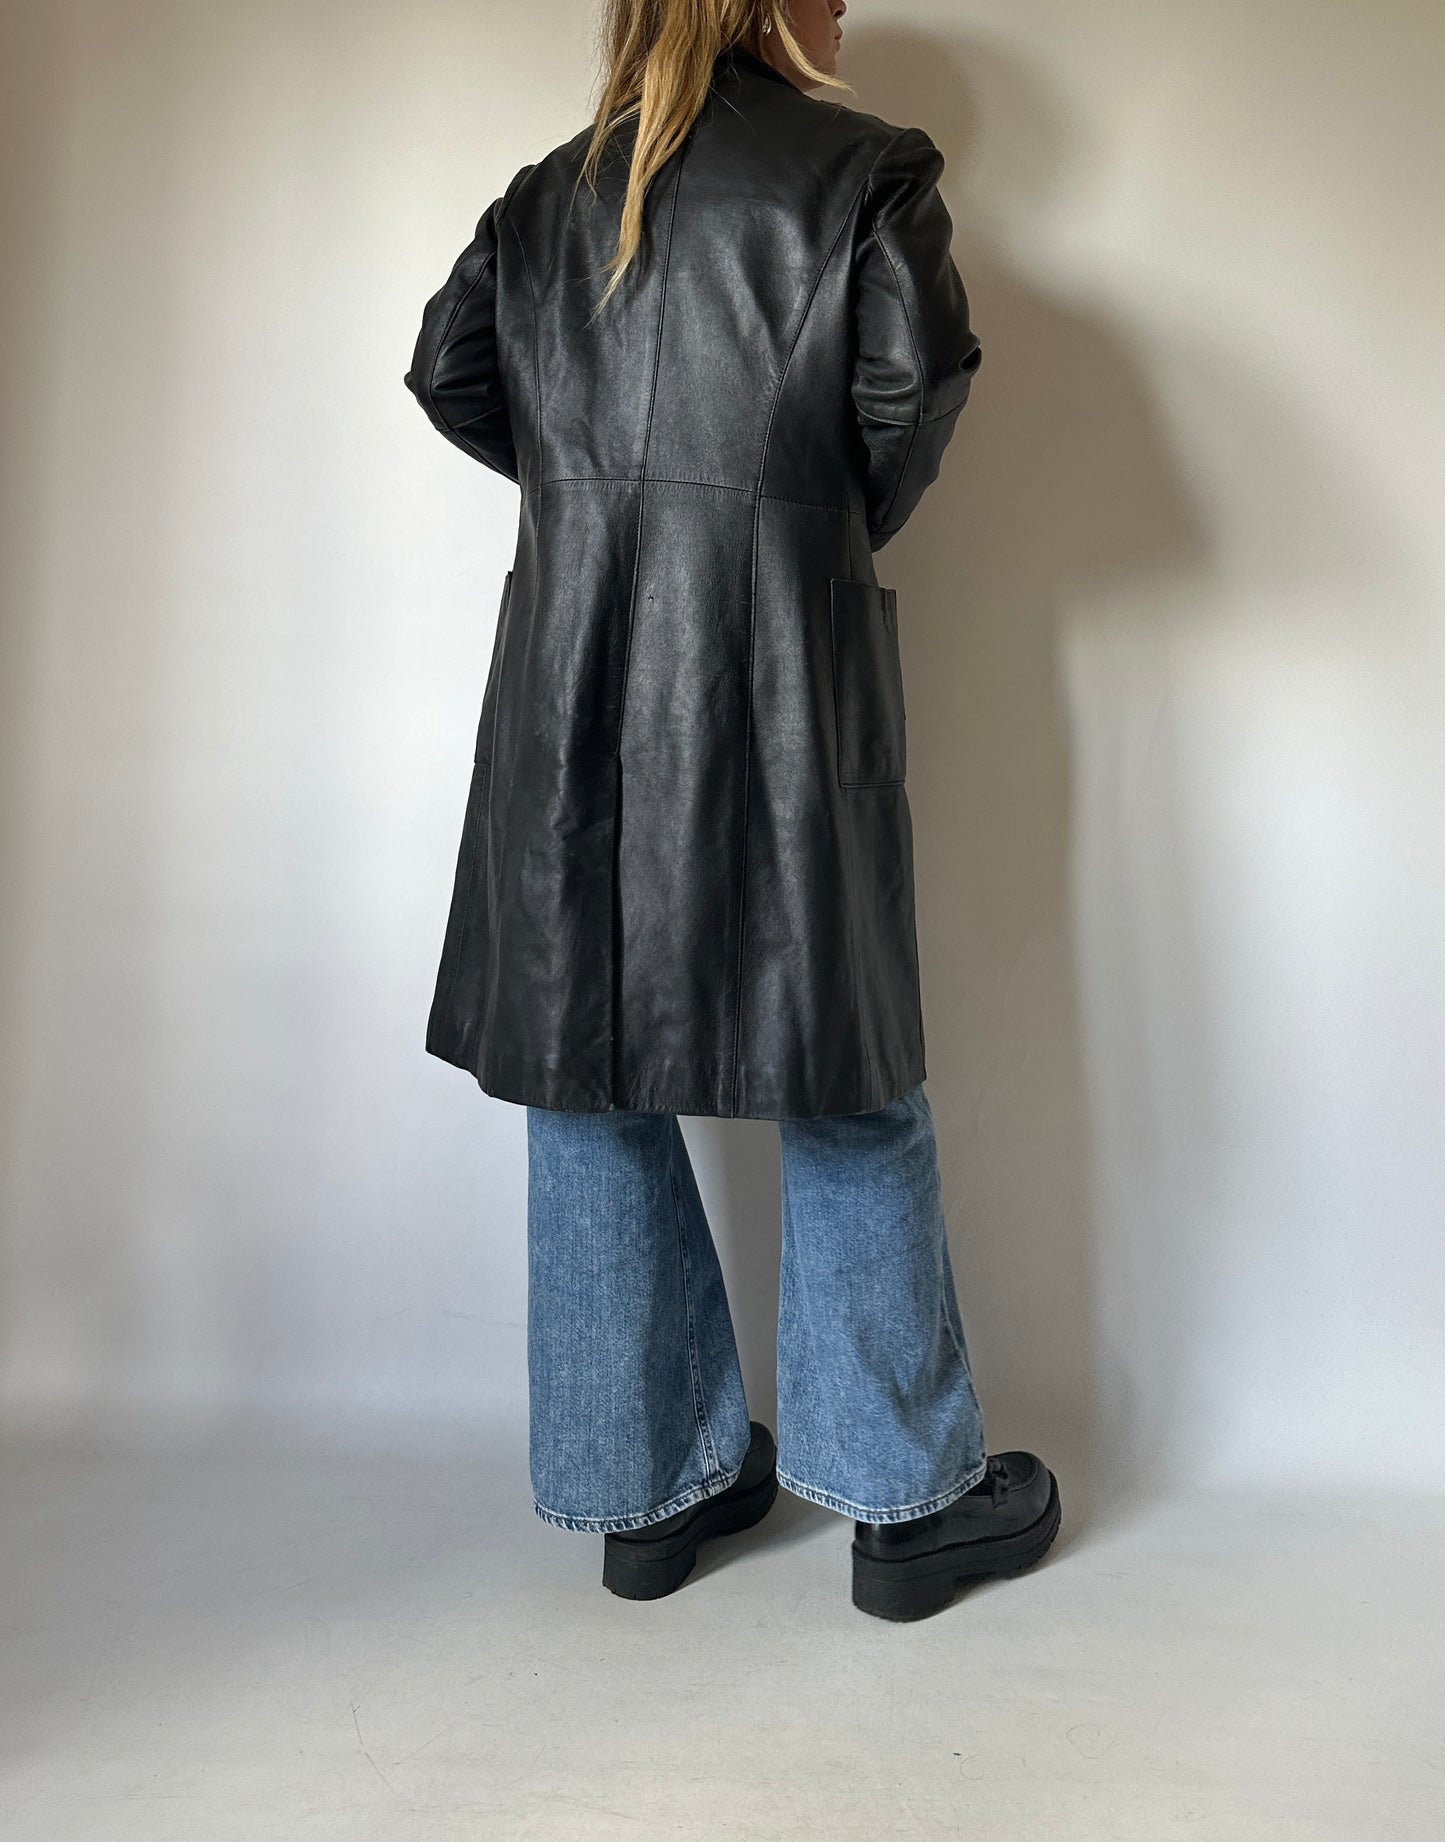 Evergreen black leather trench